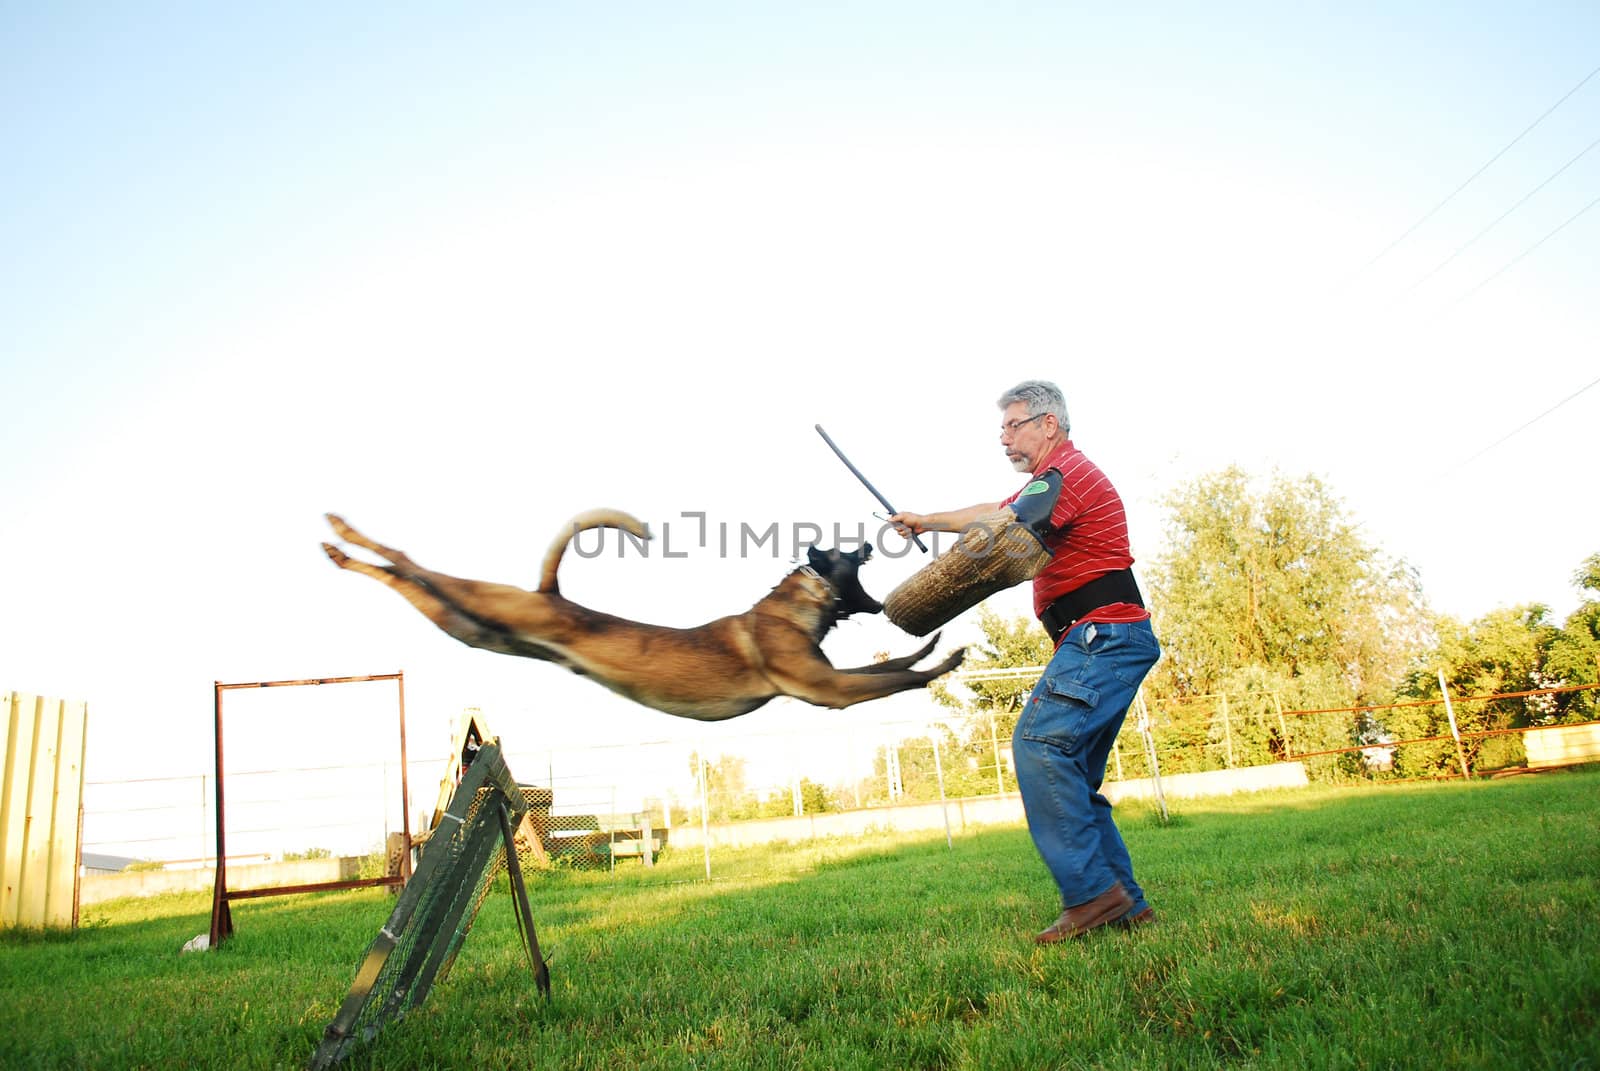 purebred belgian shepherd dog jumping over an obstacle and attacking a man